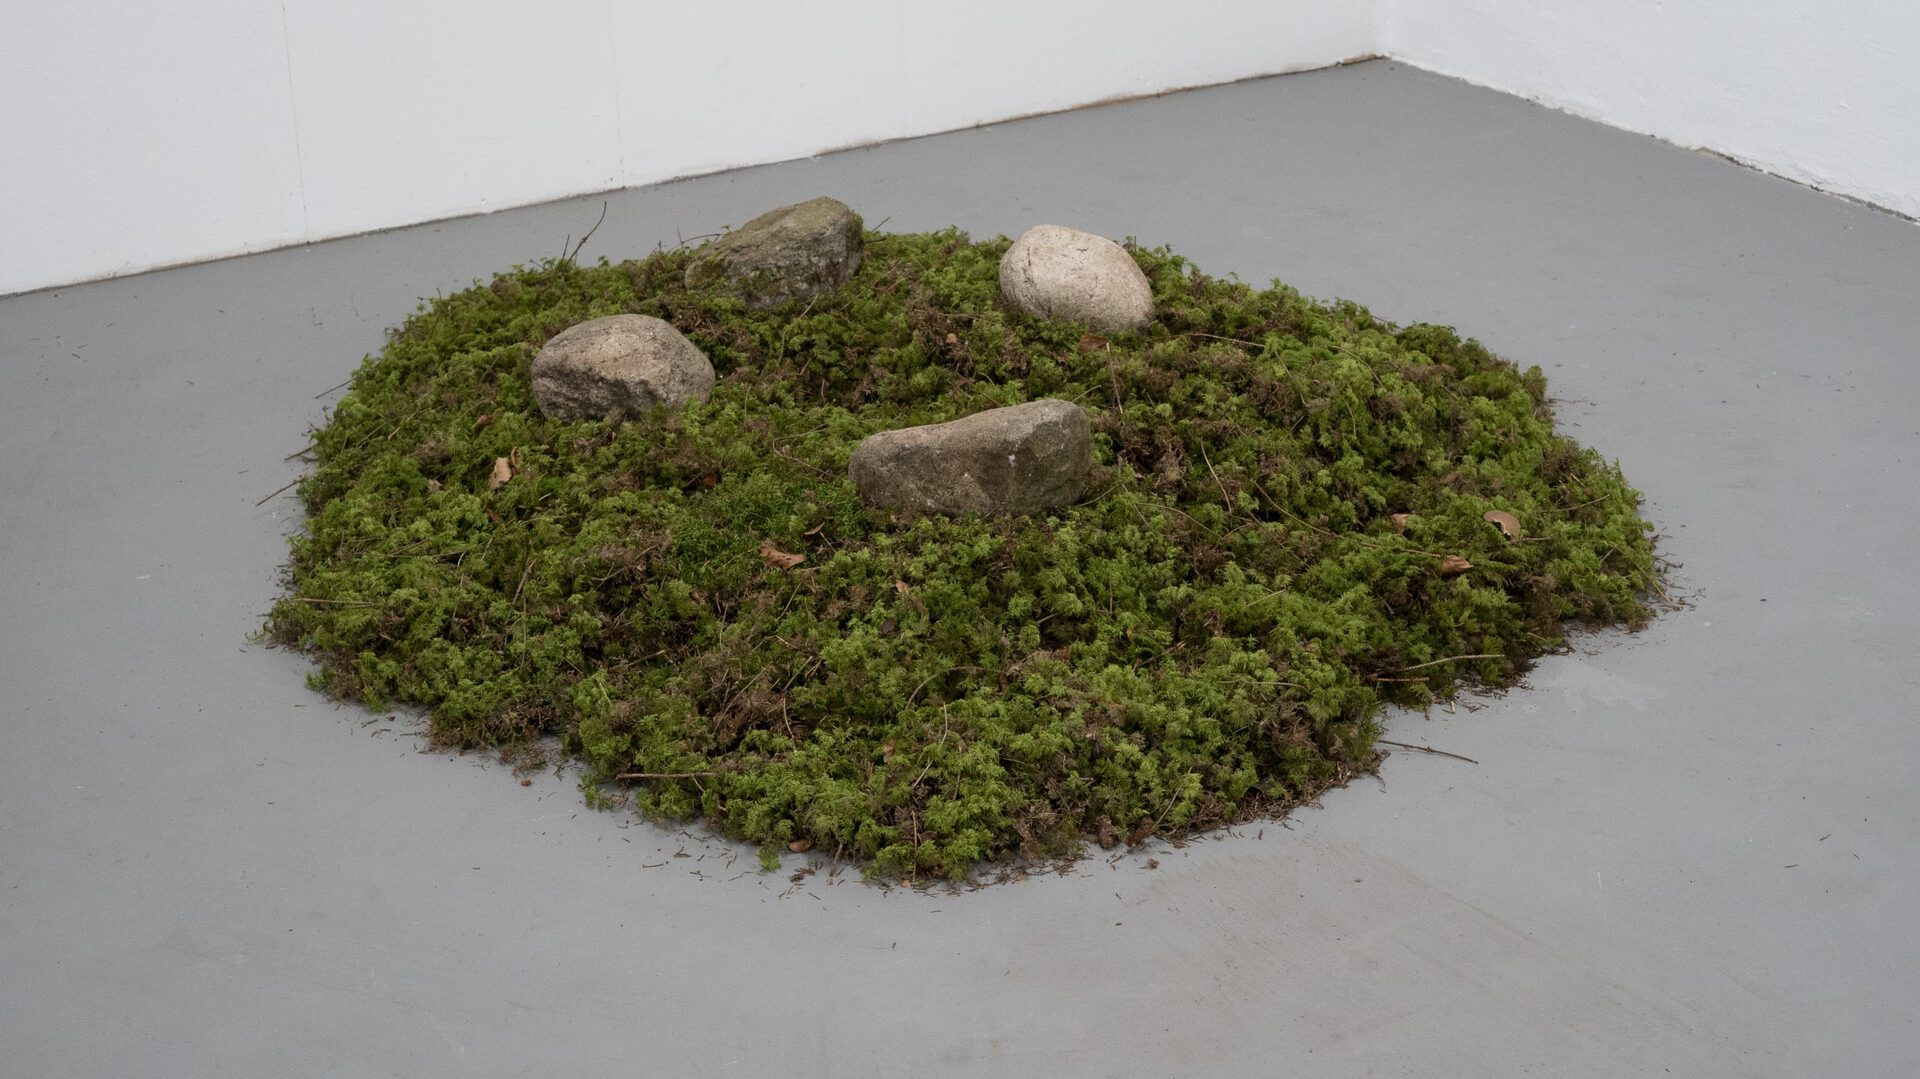 Vincent Scheers, 4 rocks planning a murder, 2020, rocks, moss, speakers, cable, audio-interface.